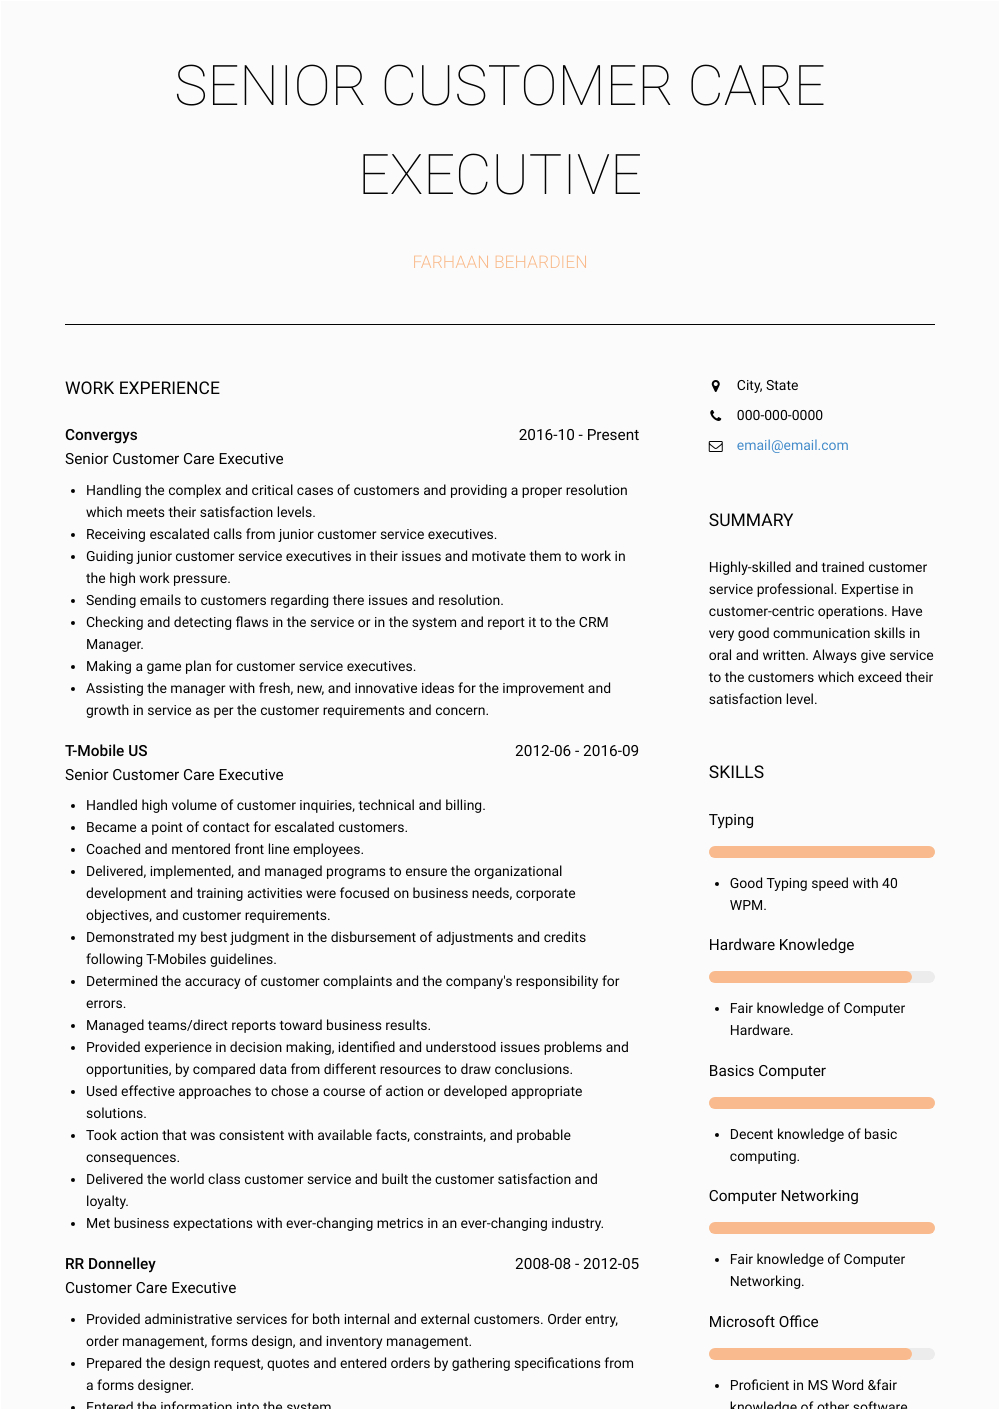 Resume Samples for Customer Service Executive Customer Care Executive Resume Samples and Templates